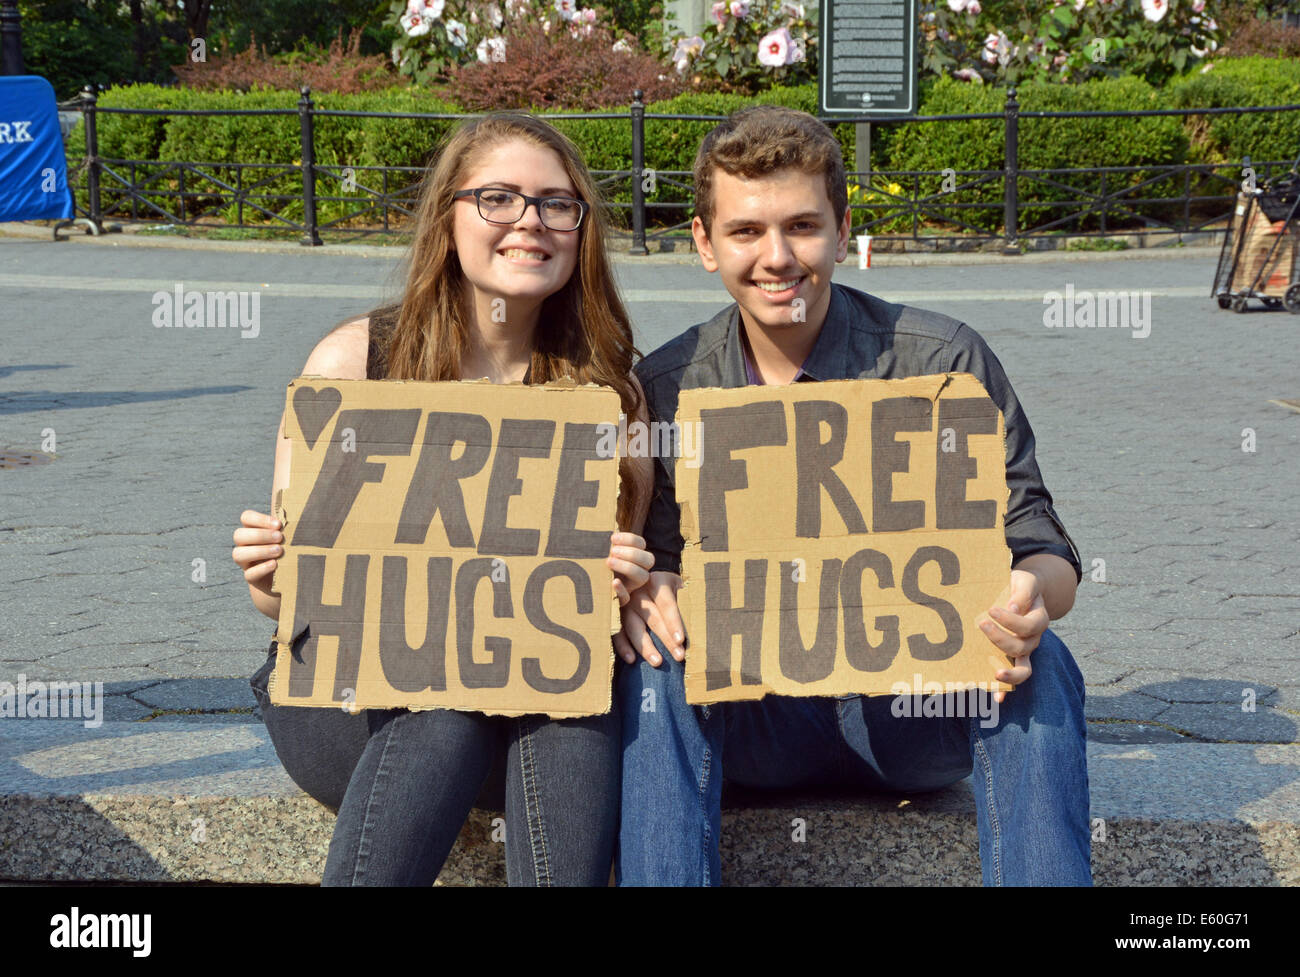 Portrait of a young man & woman holding sign saying FREE HUGS. In Union Square Park, new York City. Stock Photo